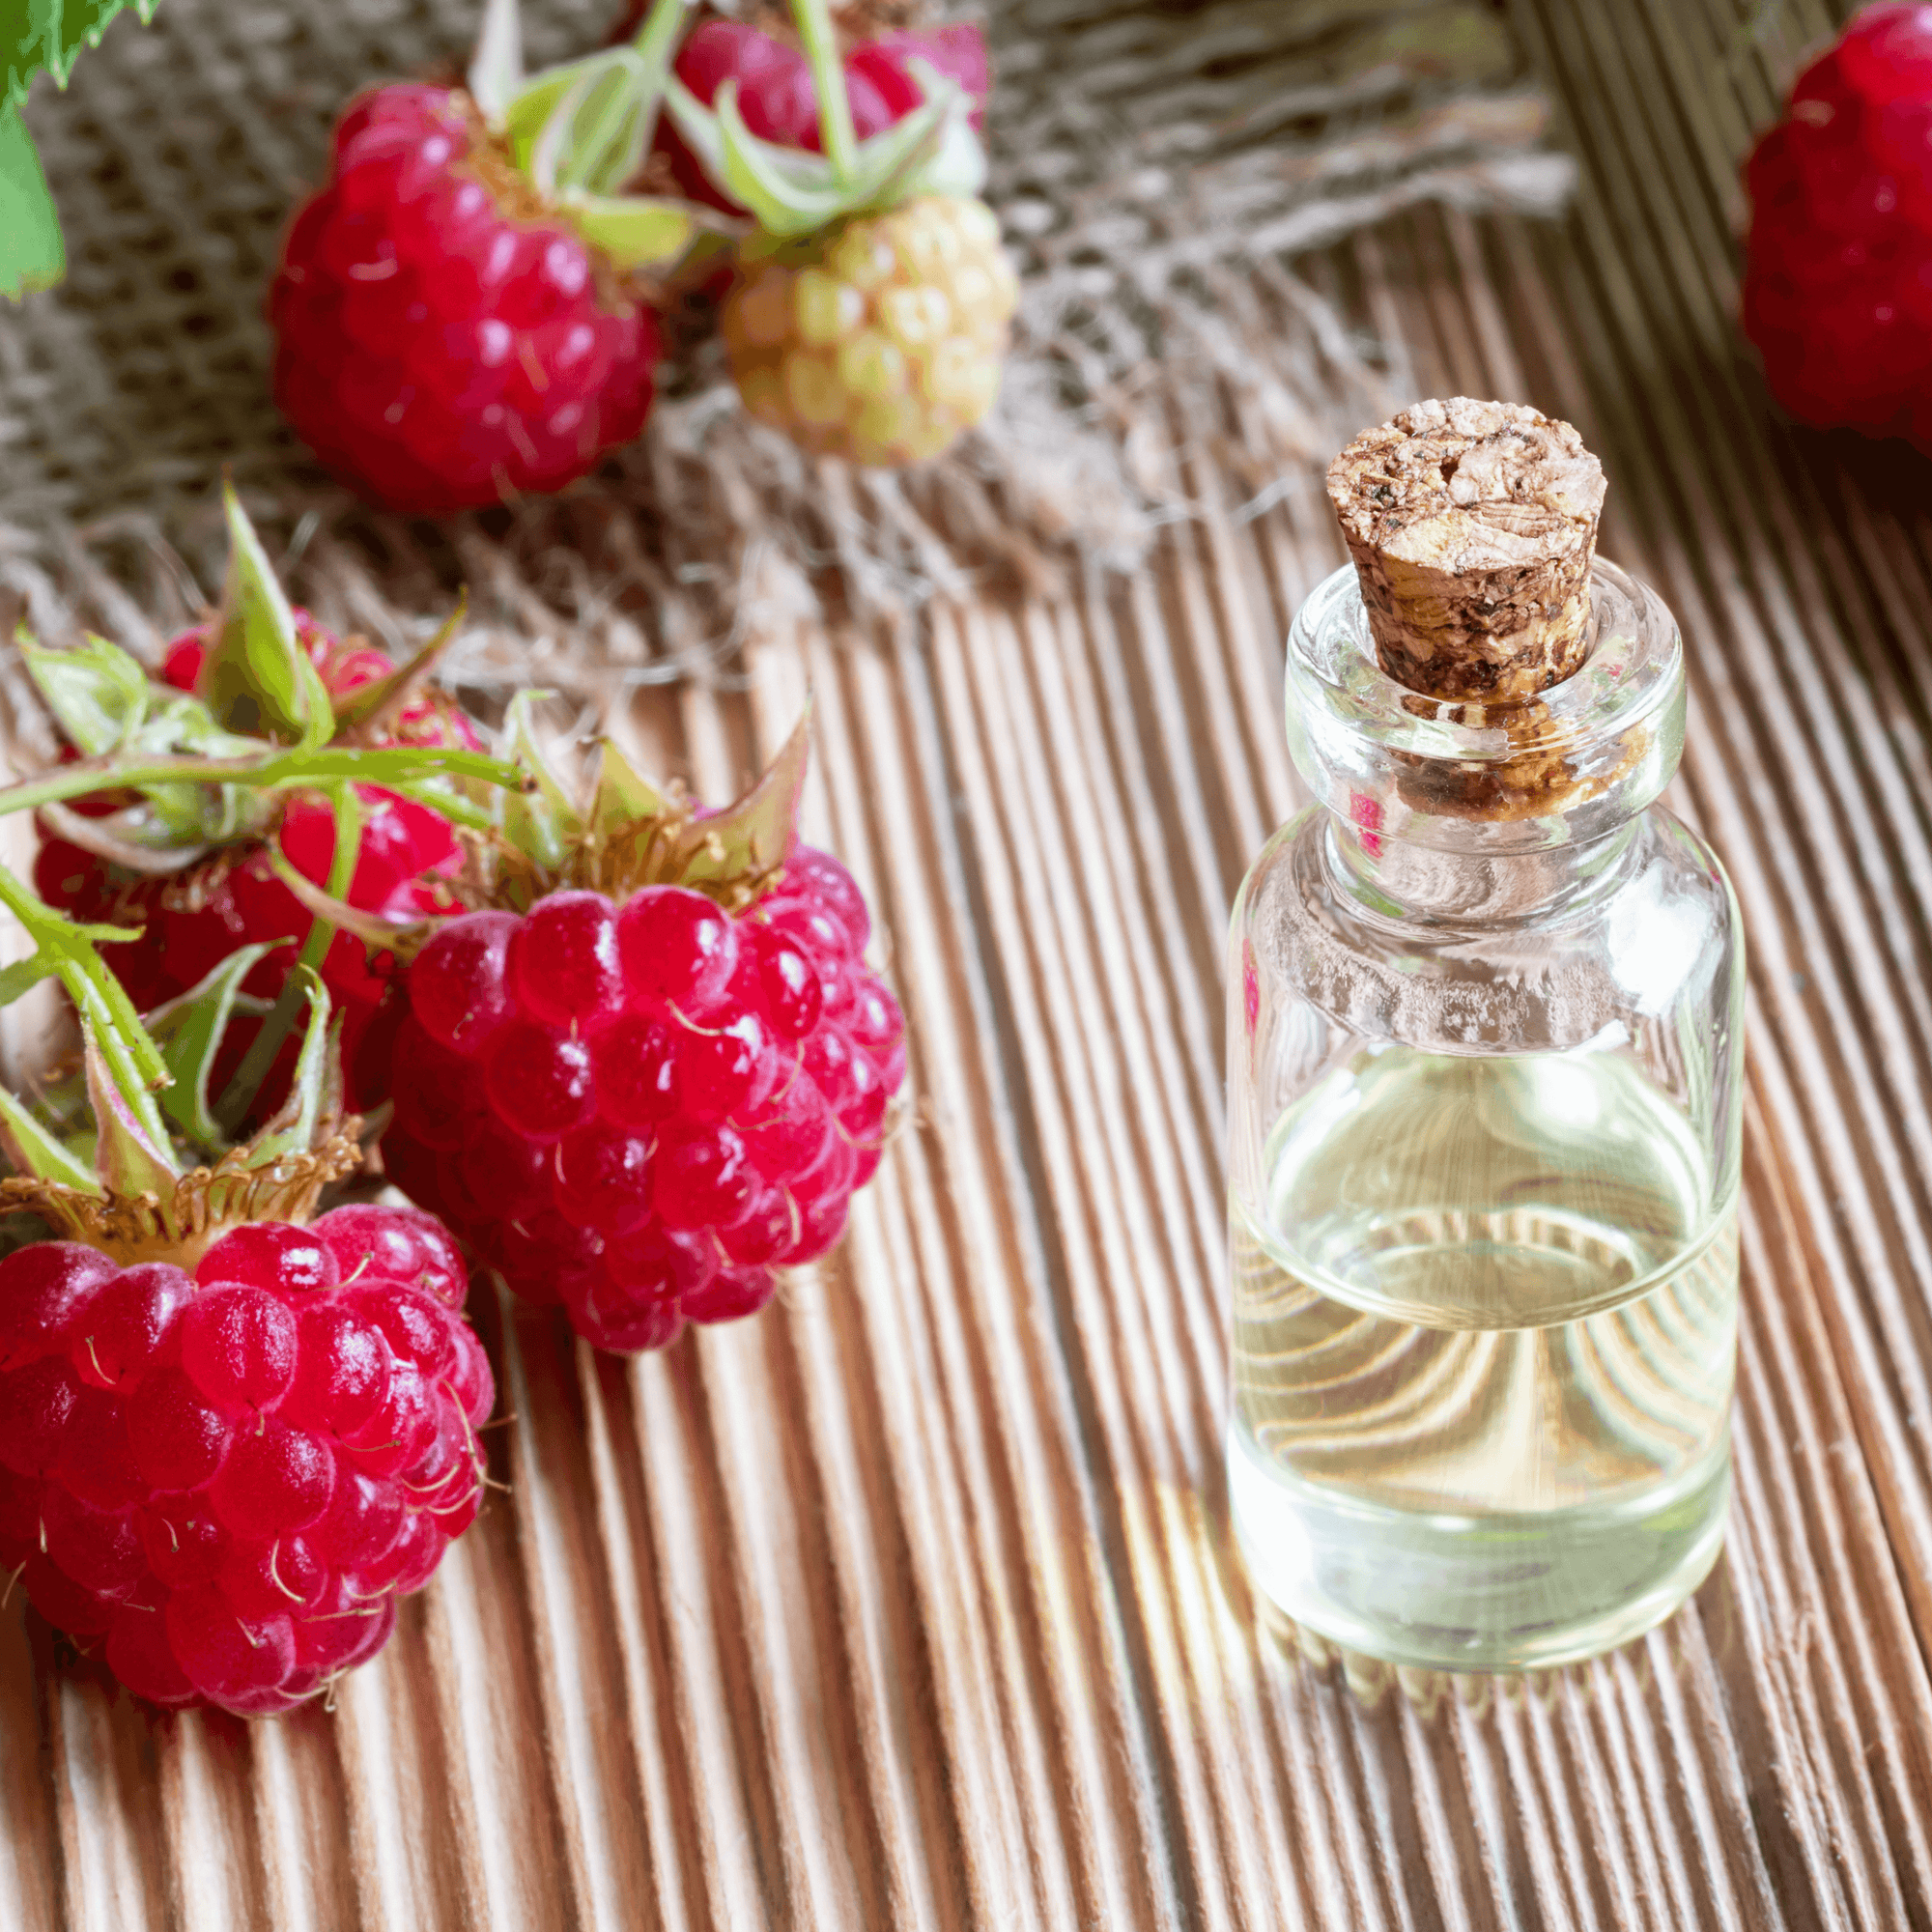 Be Bohemian Botanical Sea Serum Raspberry Seed Oil. A corked see-through Boston round bottle with a clear liquid inside sits nest to four freshly picked raspberry's.